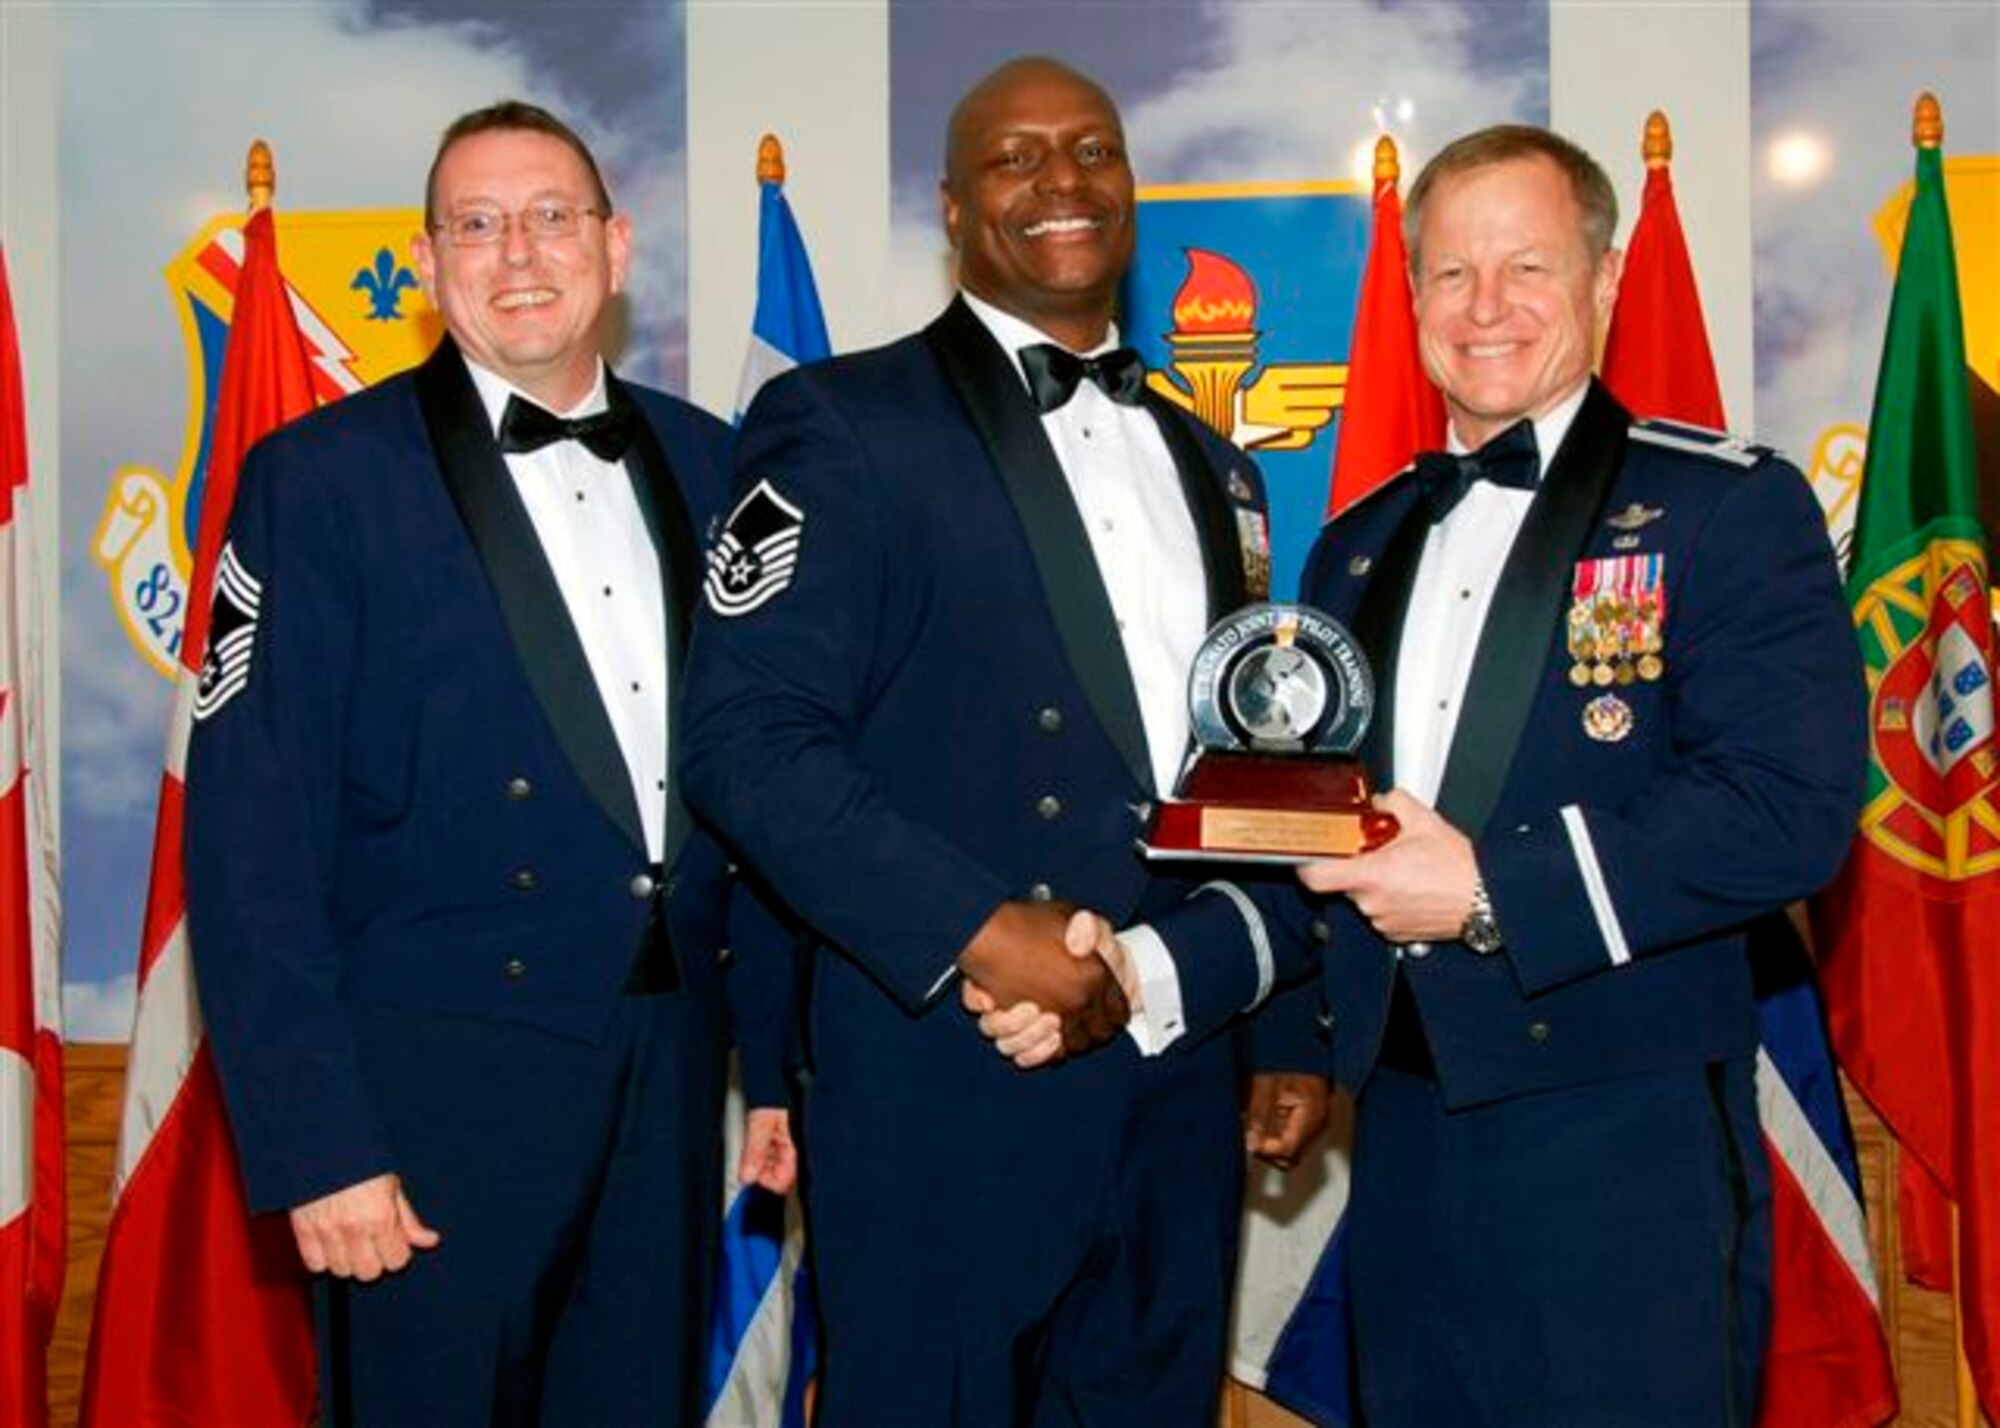 Master Sgt. Franklin Moore, center, accepts the award as the 80th Flying Training Wing's 2008 Senior NCO of the Year. The 80th FTW sergeant was recognized for role as the aircraft maintenance quality assurance office. He was recognized as the wing's Senior NCO of the Quater for the first and last quater of 2008. Also pictured is Col. David Petersen, 80th FTW commander, and Chief Master Sgt. Norman Thierolf, the wing's command chief. (U.S. Air Force photo) 